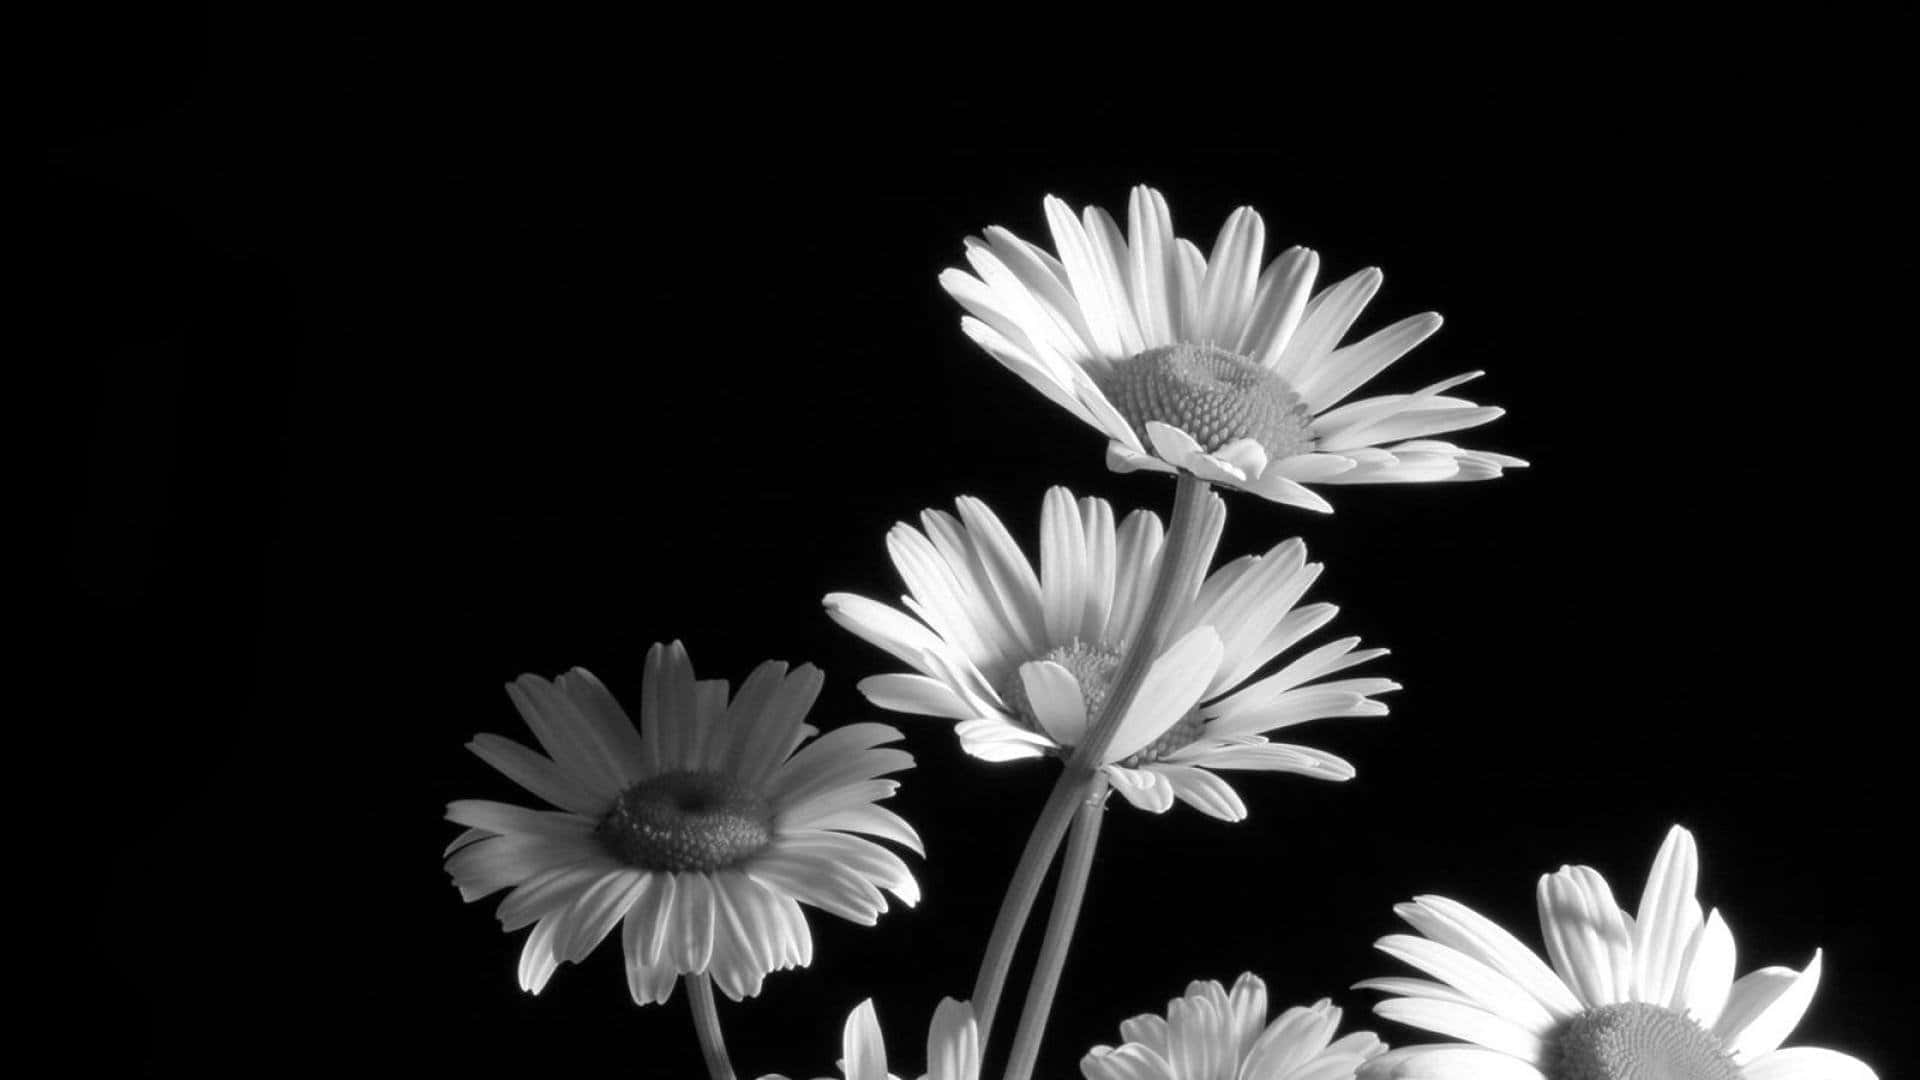 Exquisite Monochrome Representation Of A Blooming Flower Wallpaper